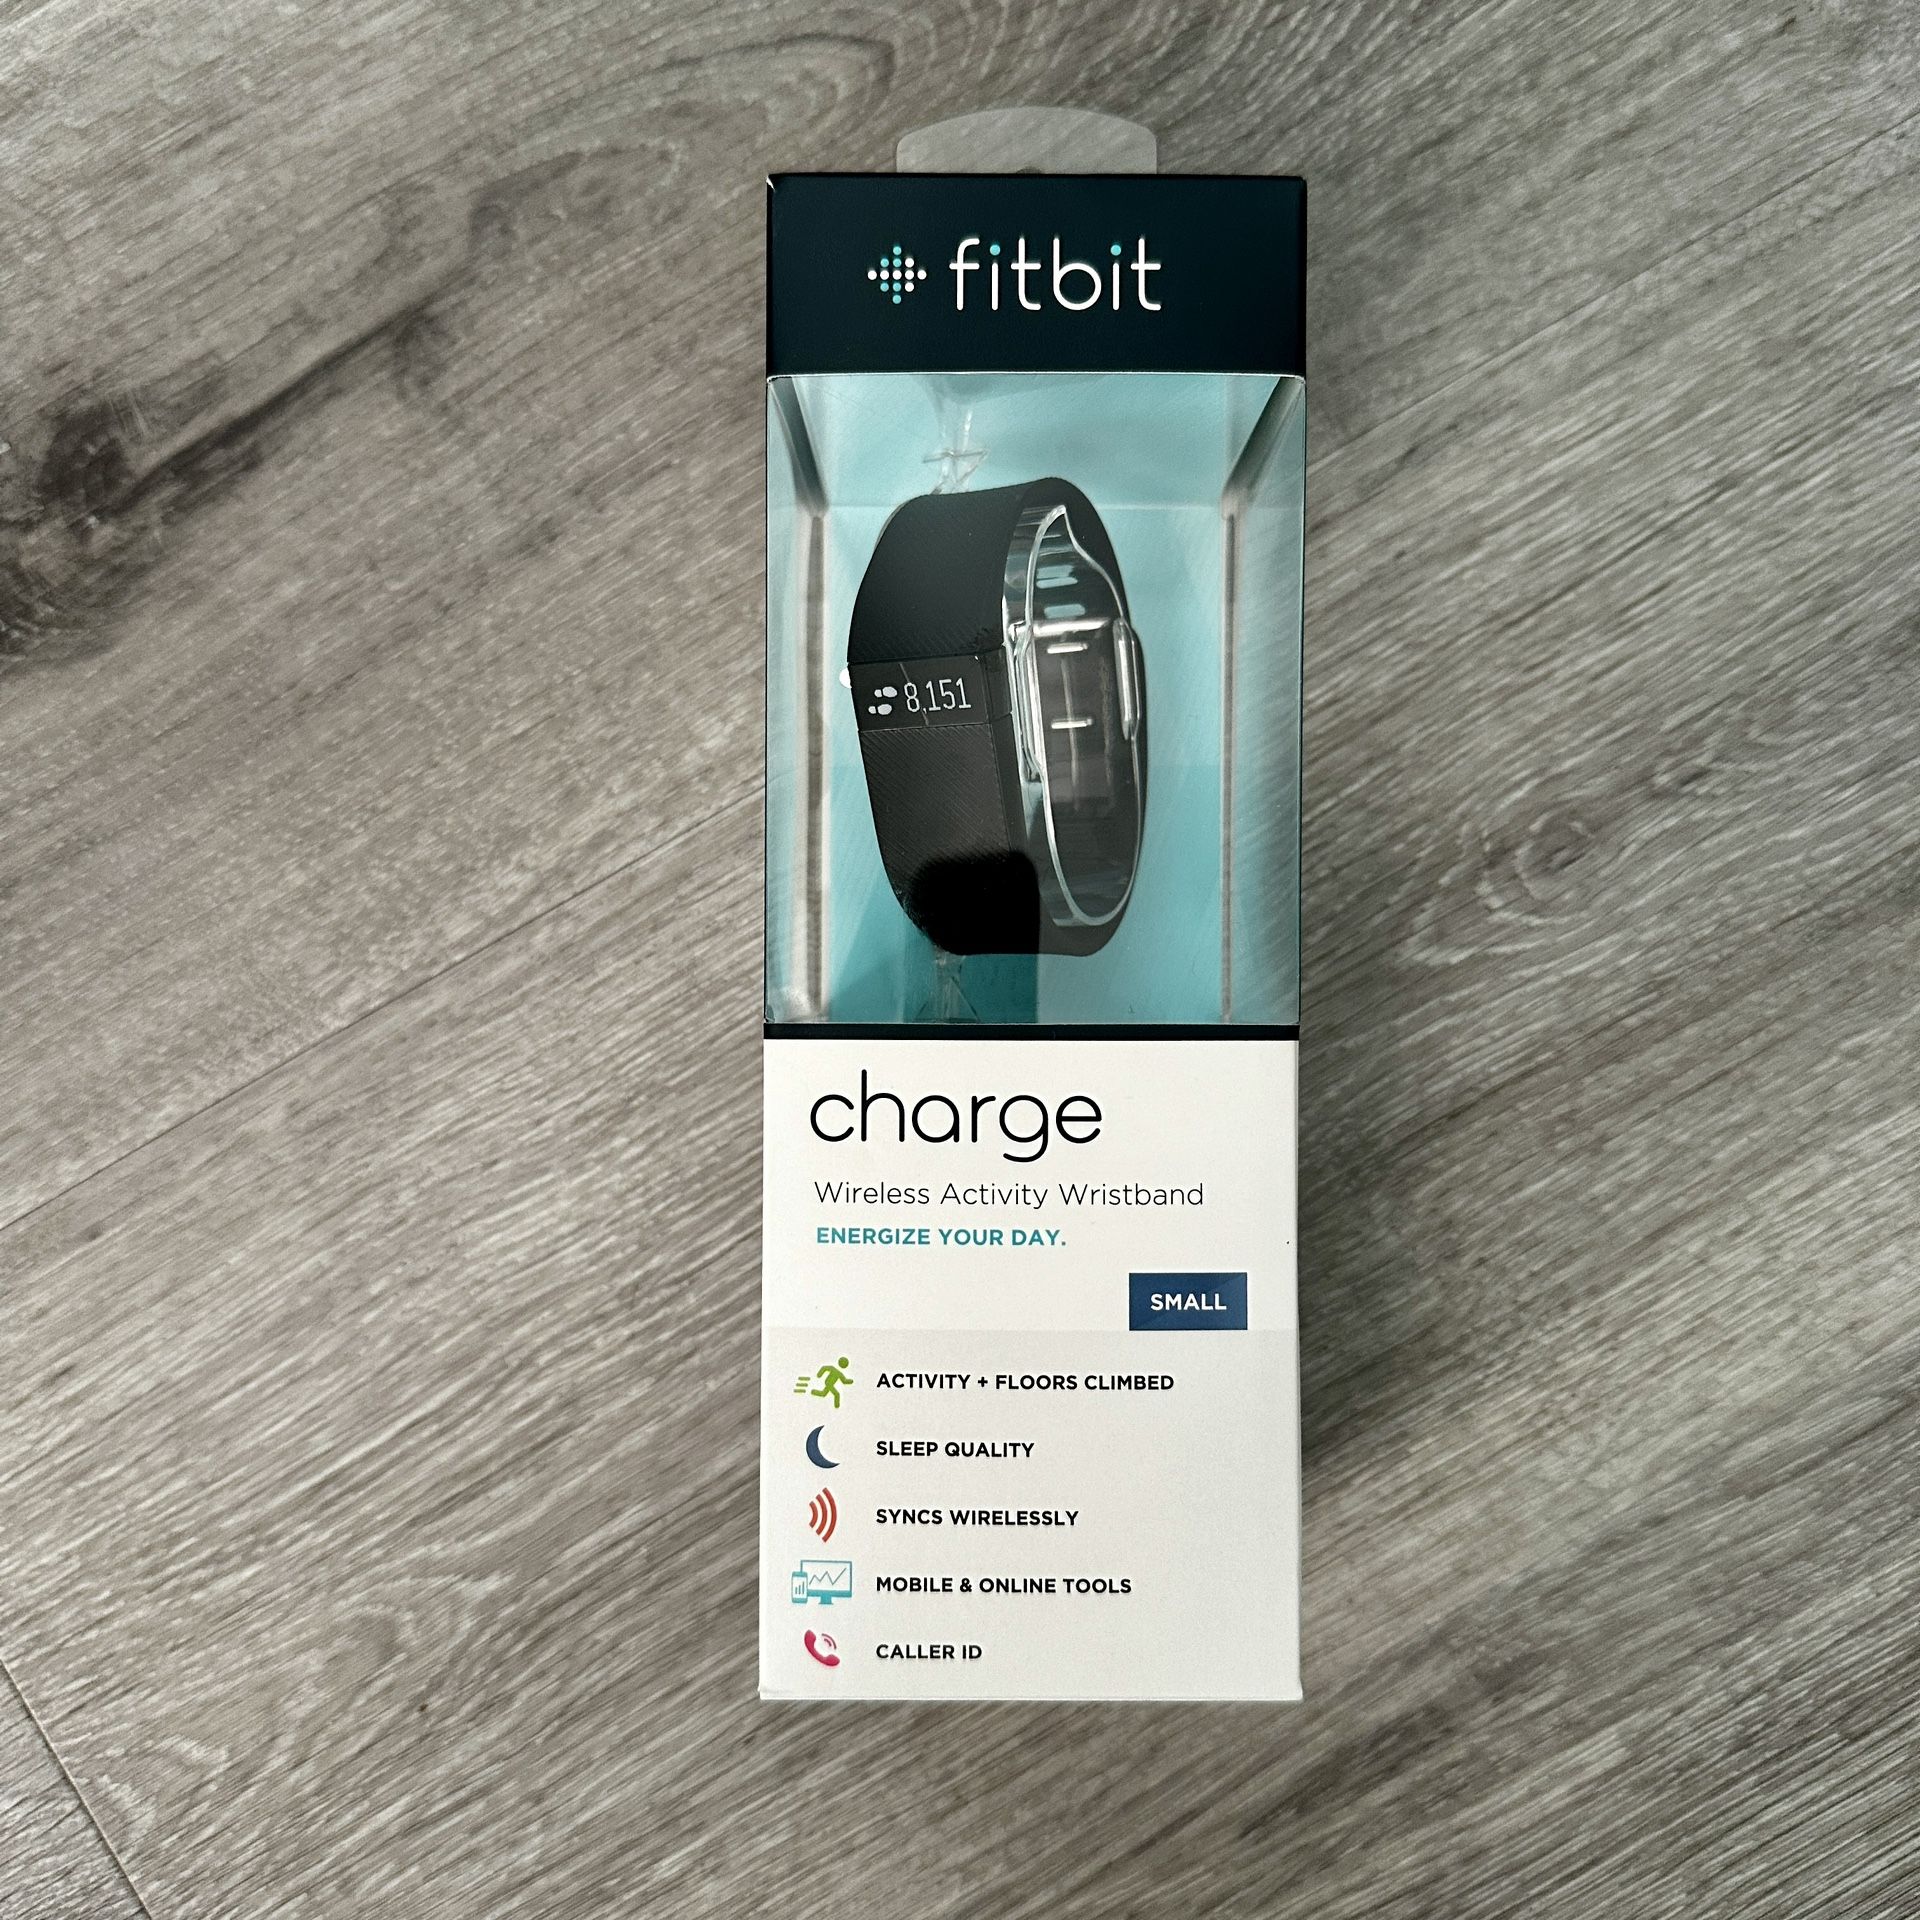 NEW Fitbit Charge Wireless Activity Wristband - Black Size Small